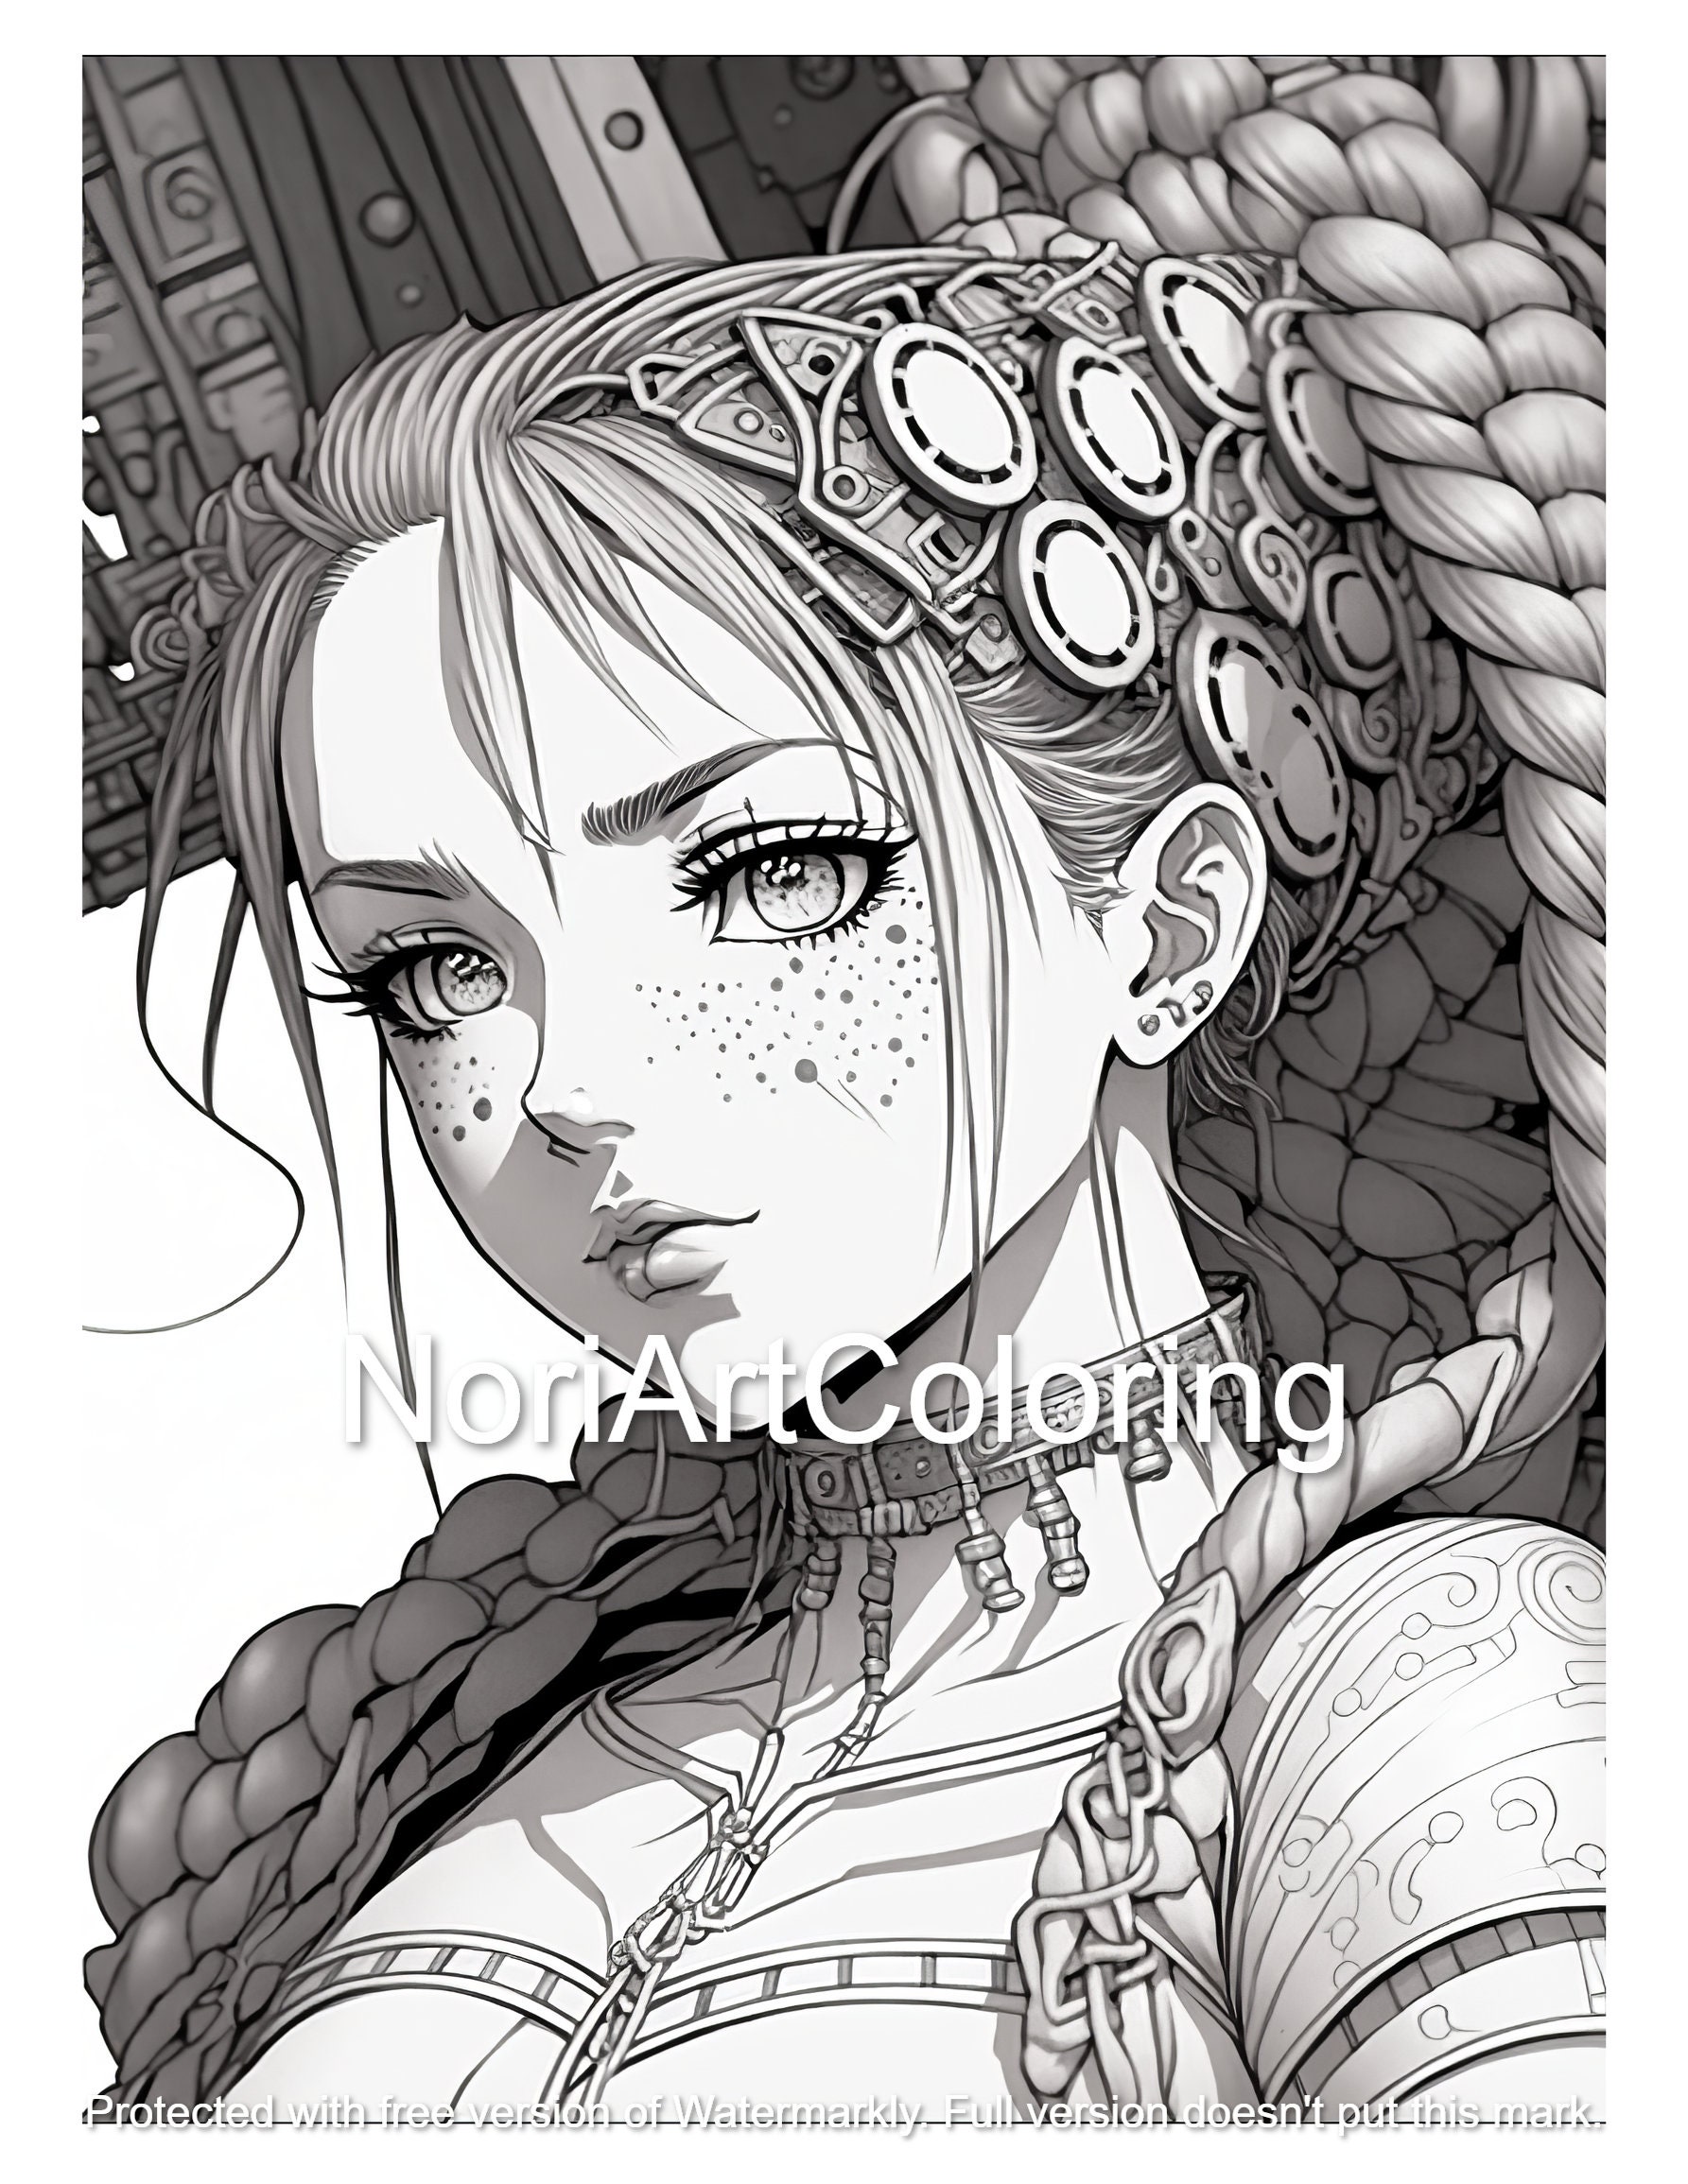 Premium AI Image  An adult coloring book pages for an anime art of a girl  with steam engines